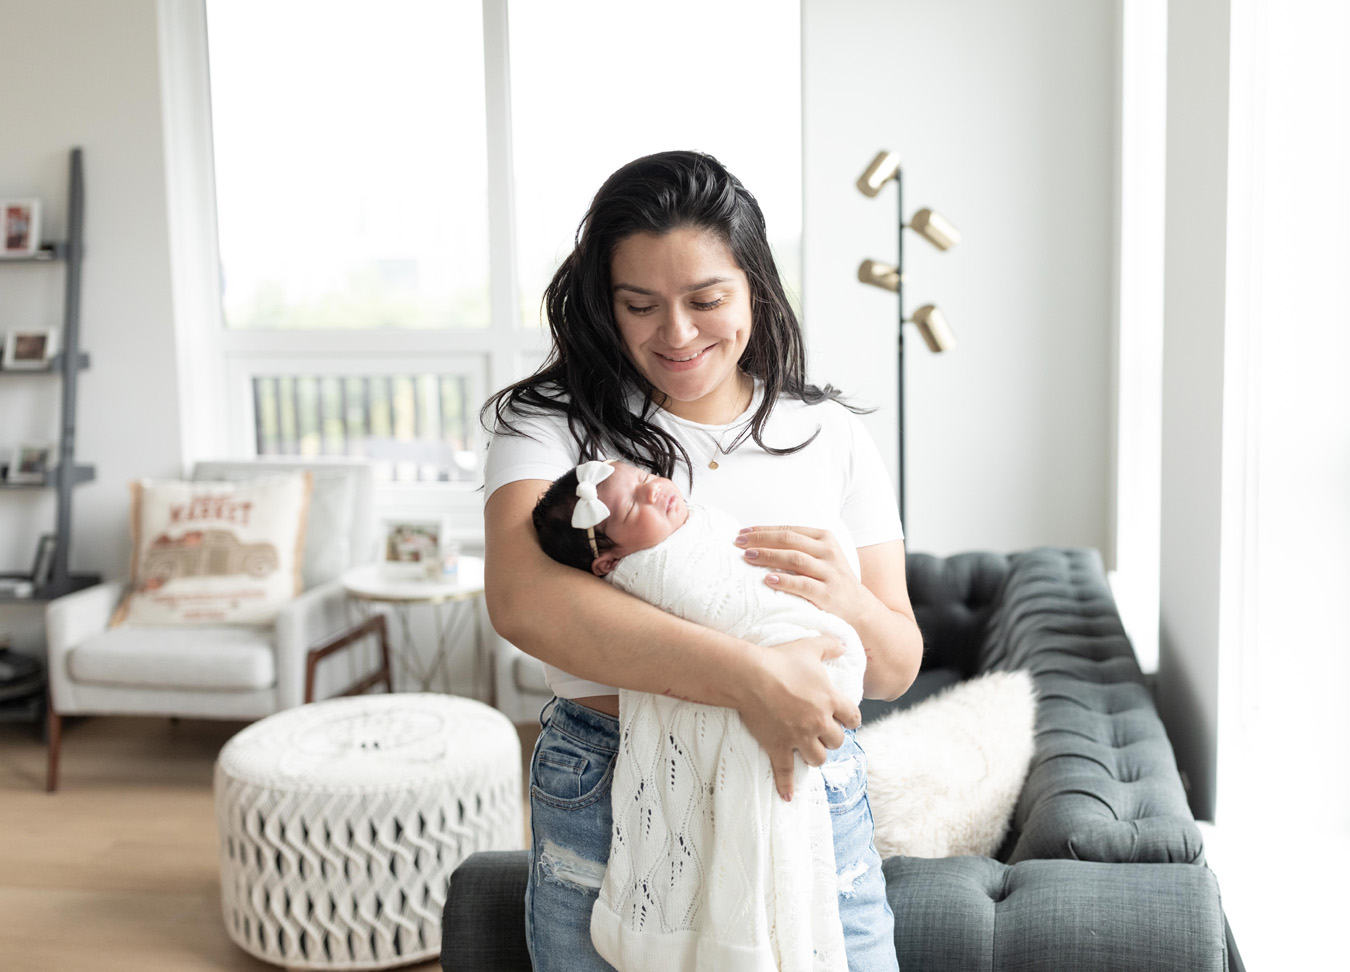 Mom holding newborn baby a in living rooom photographed by a newborn photographer in D.C.